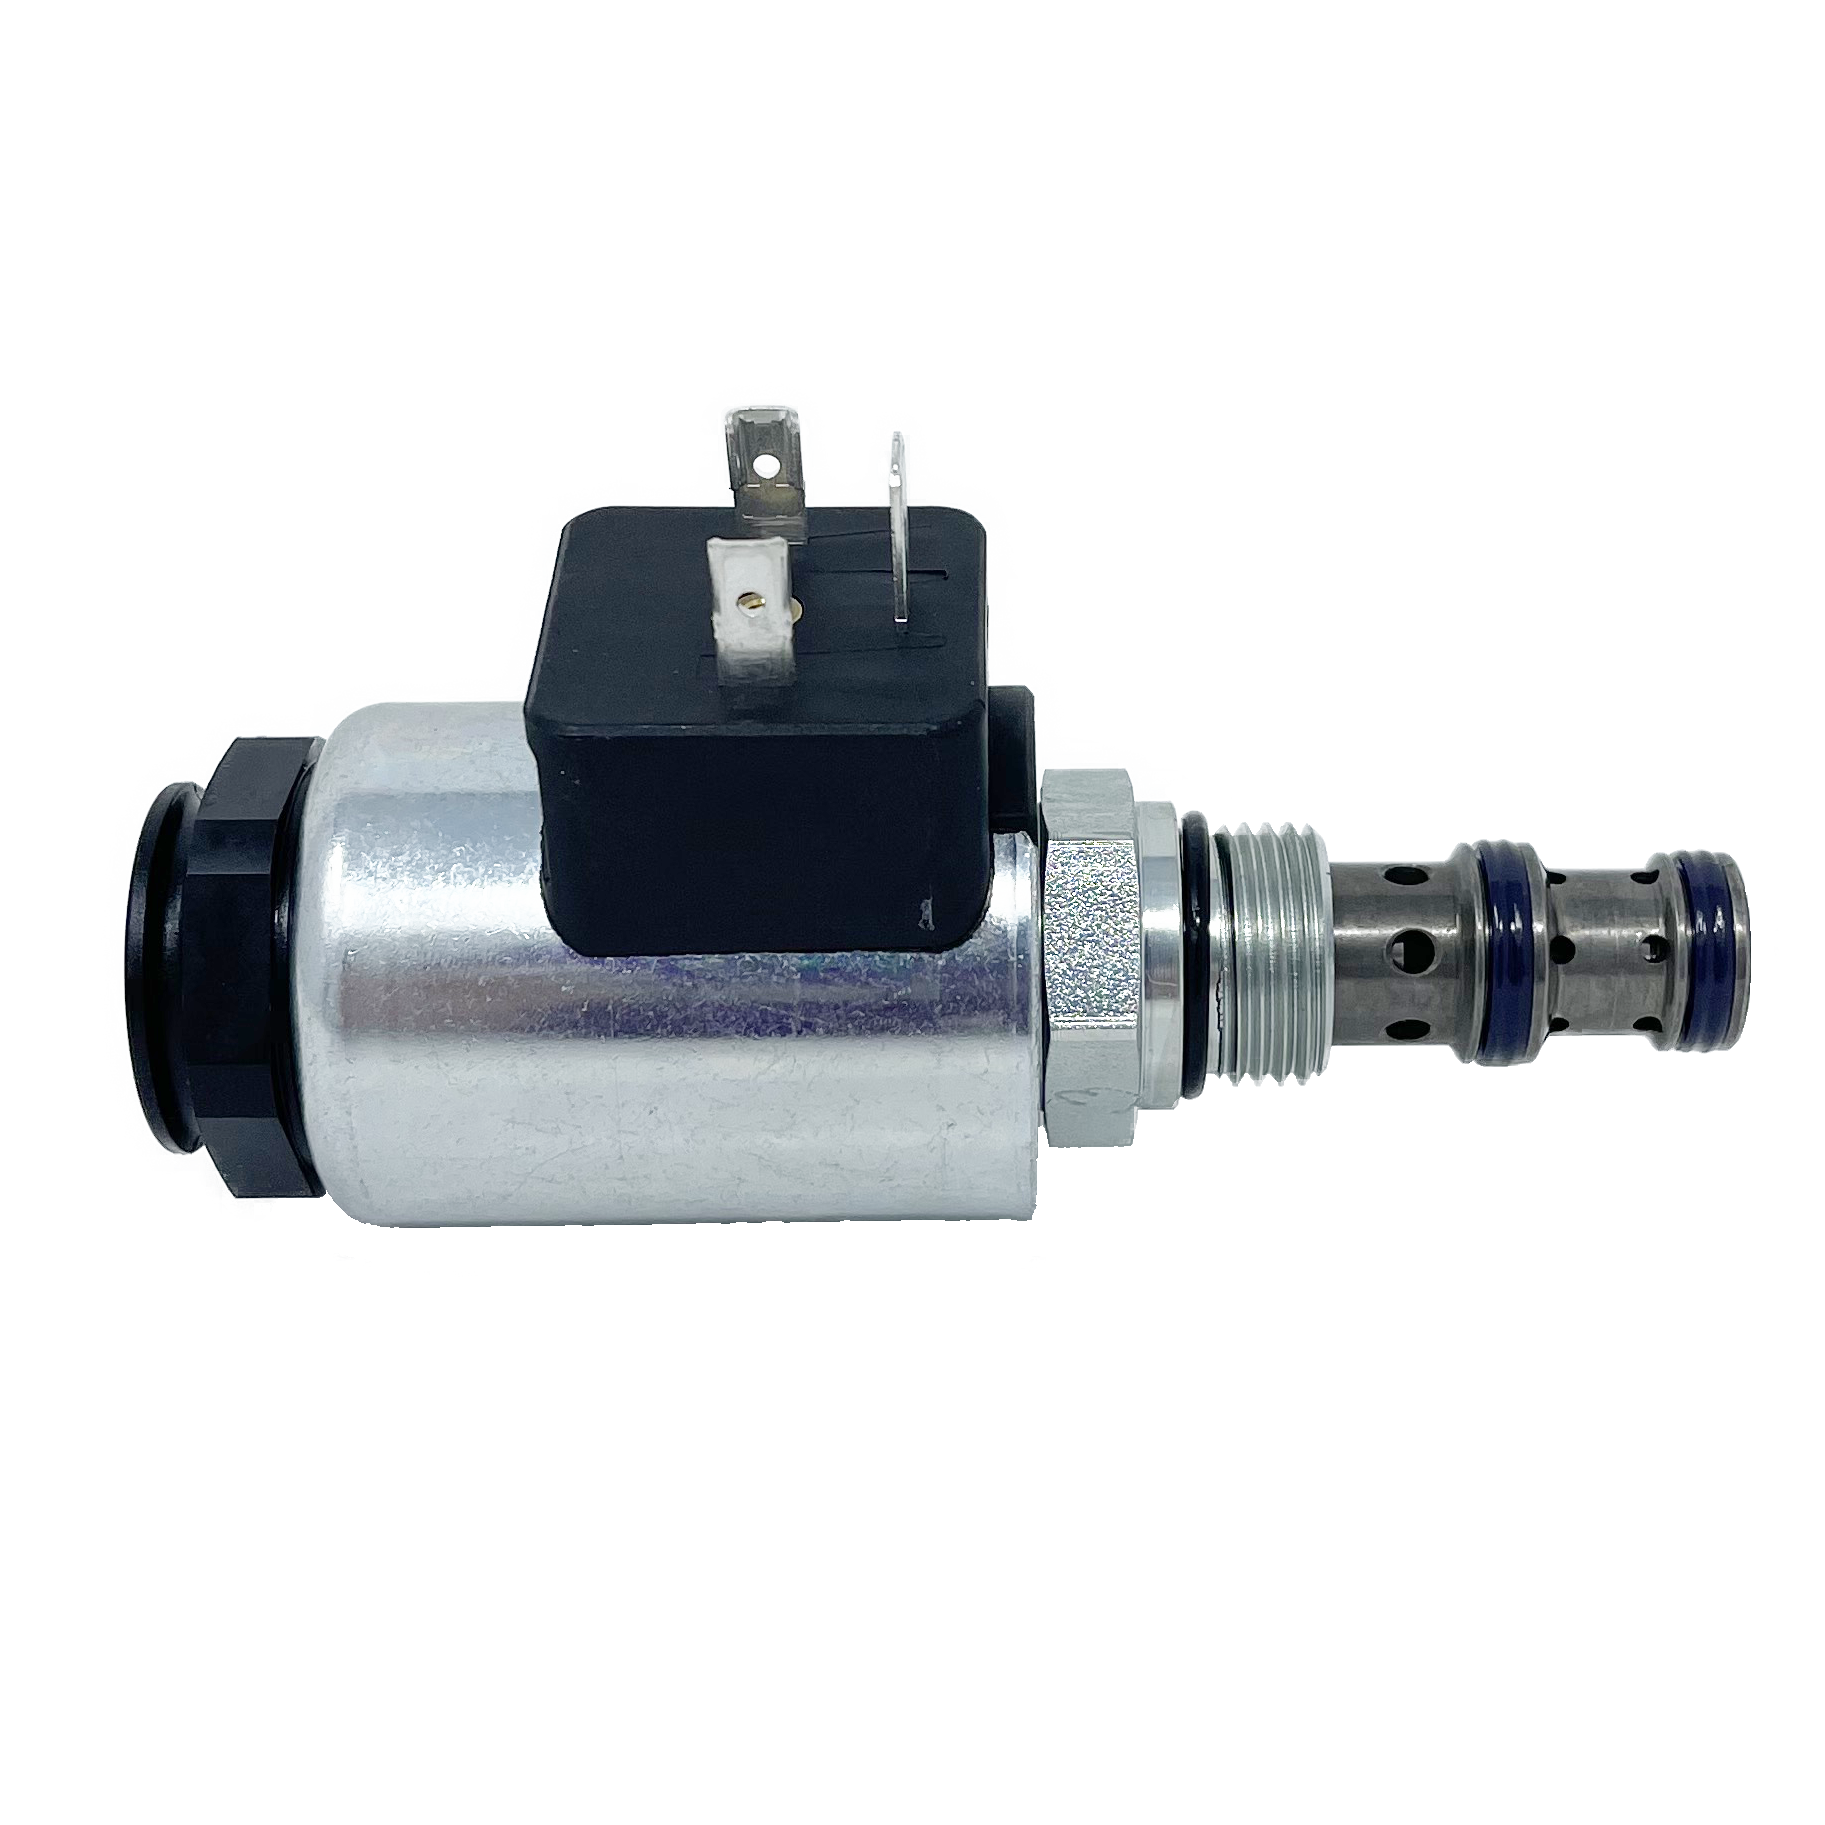 SD2E-A3/H2D21A-120DIN : Argo DCV, 8GPM, 5100psi, 2P3W, C-8-3, 120 VAC DIN, Port 3 Blocked, 2 to 1 Neutral